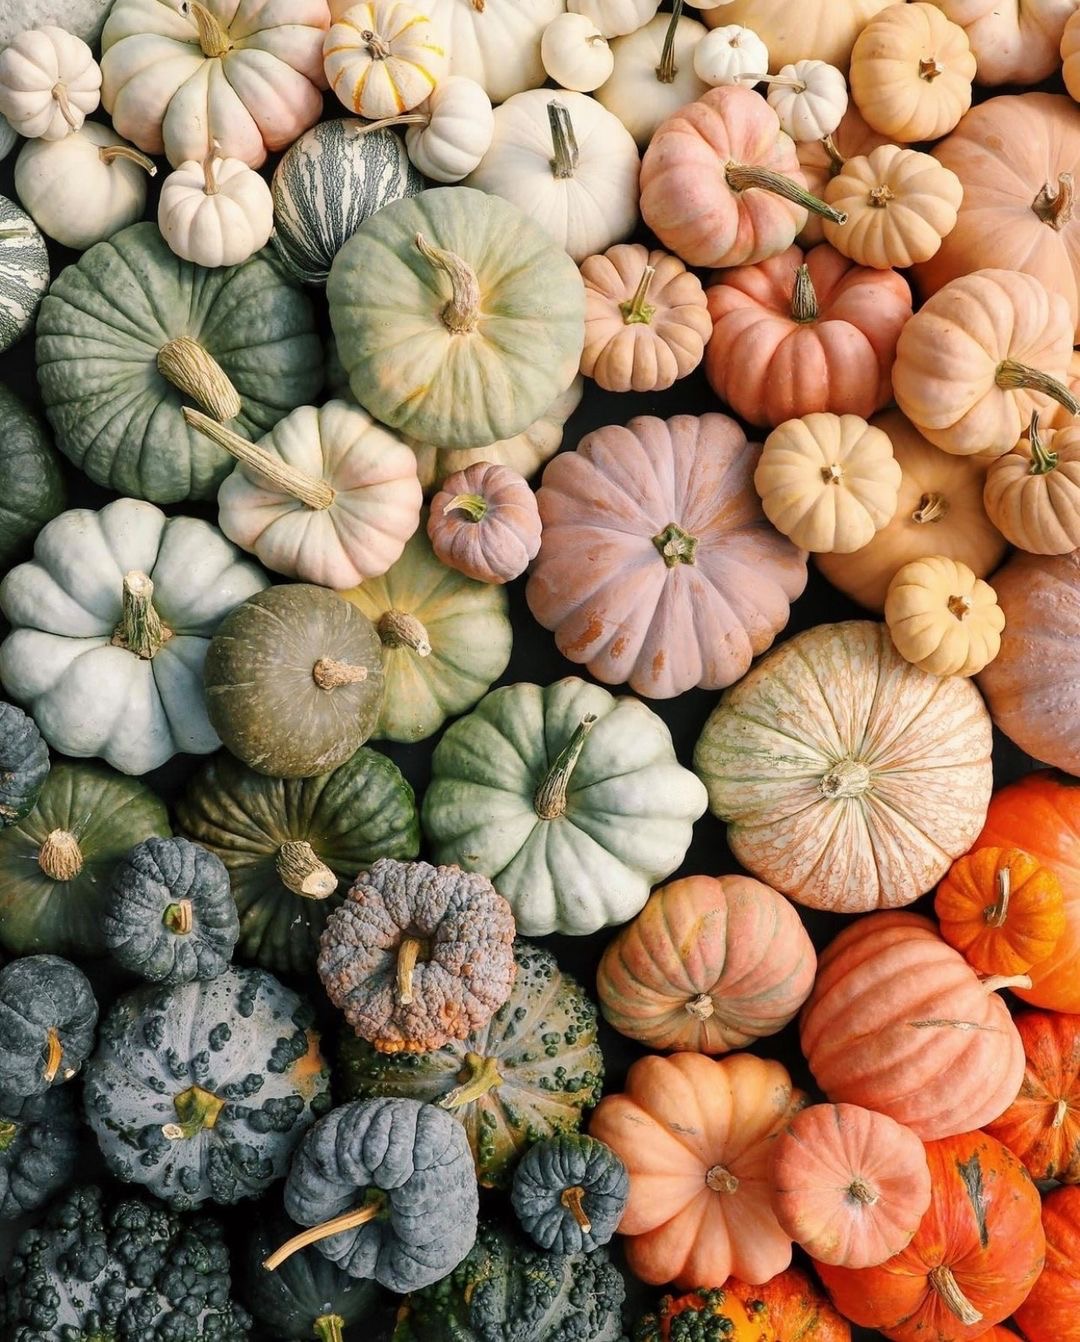 7 Different Varieties of Pumpkins That You Can Decorate for Halloween ...